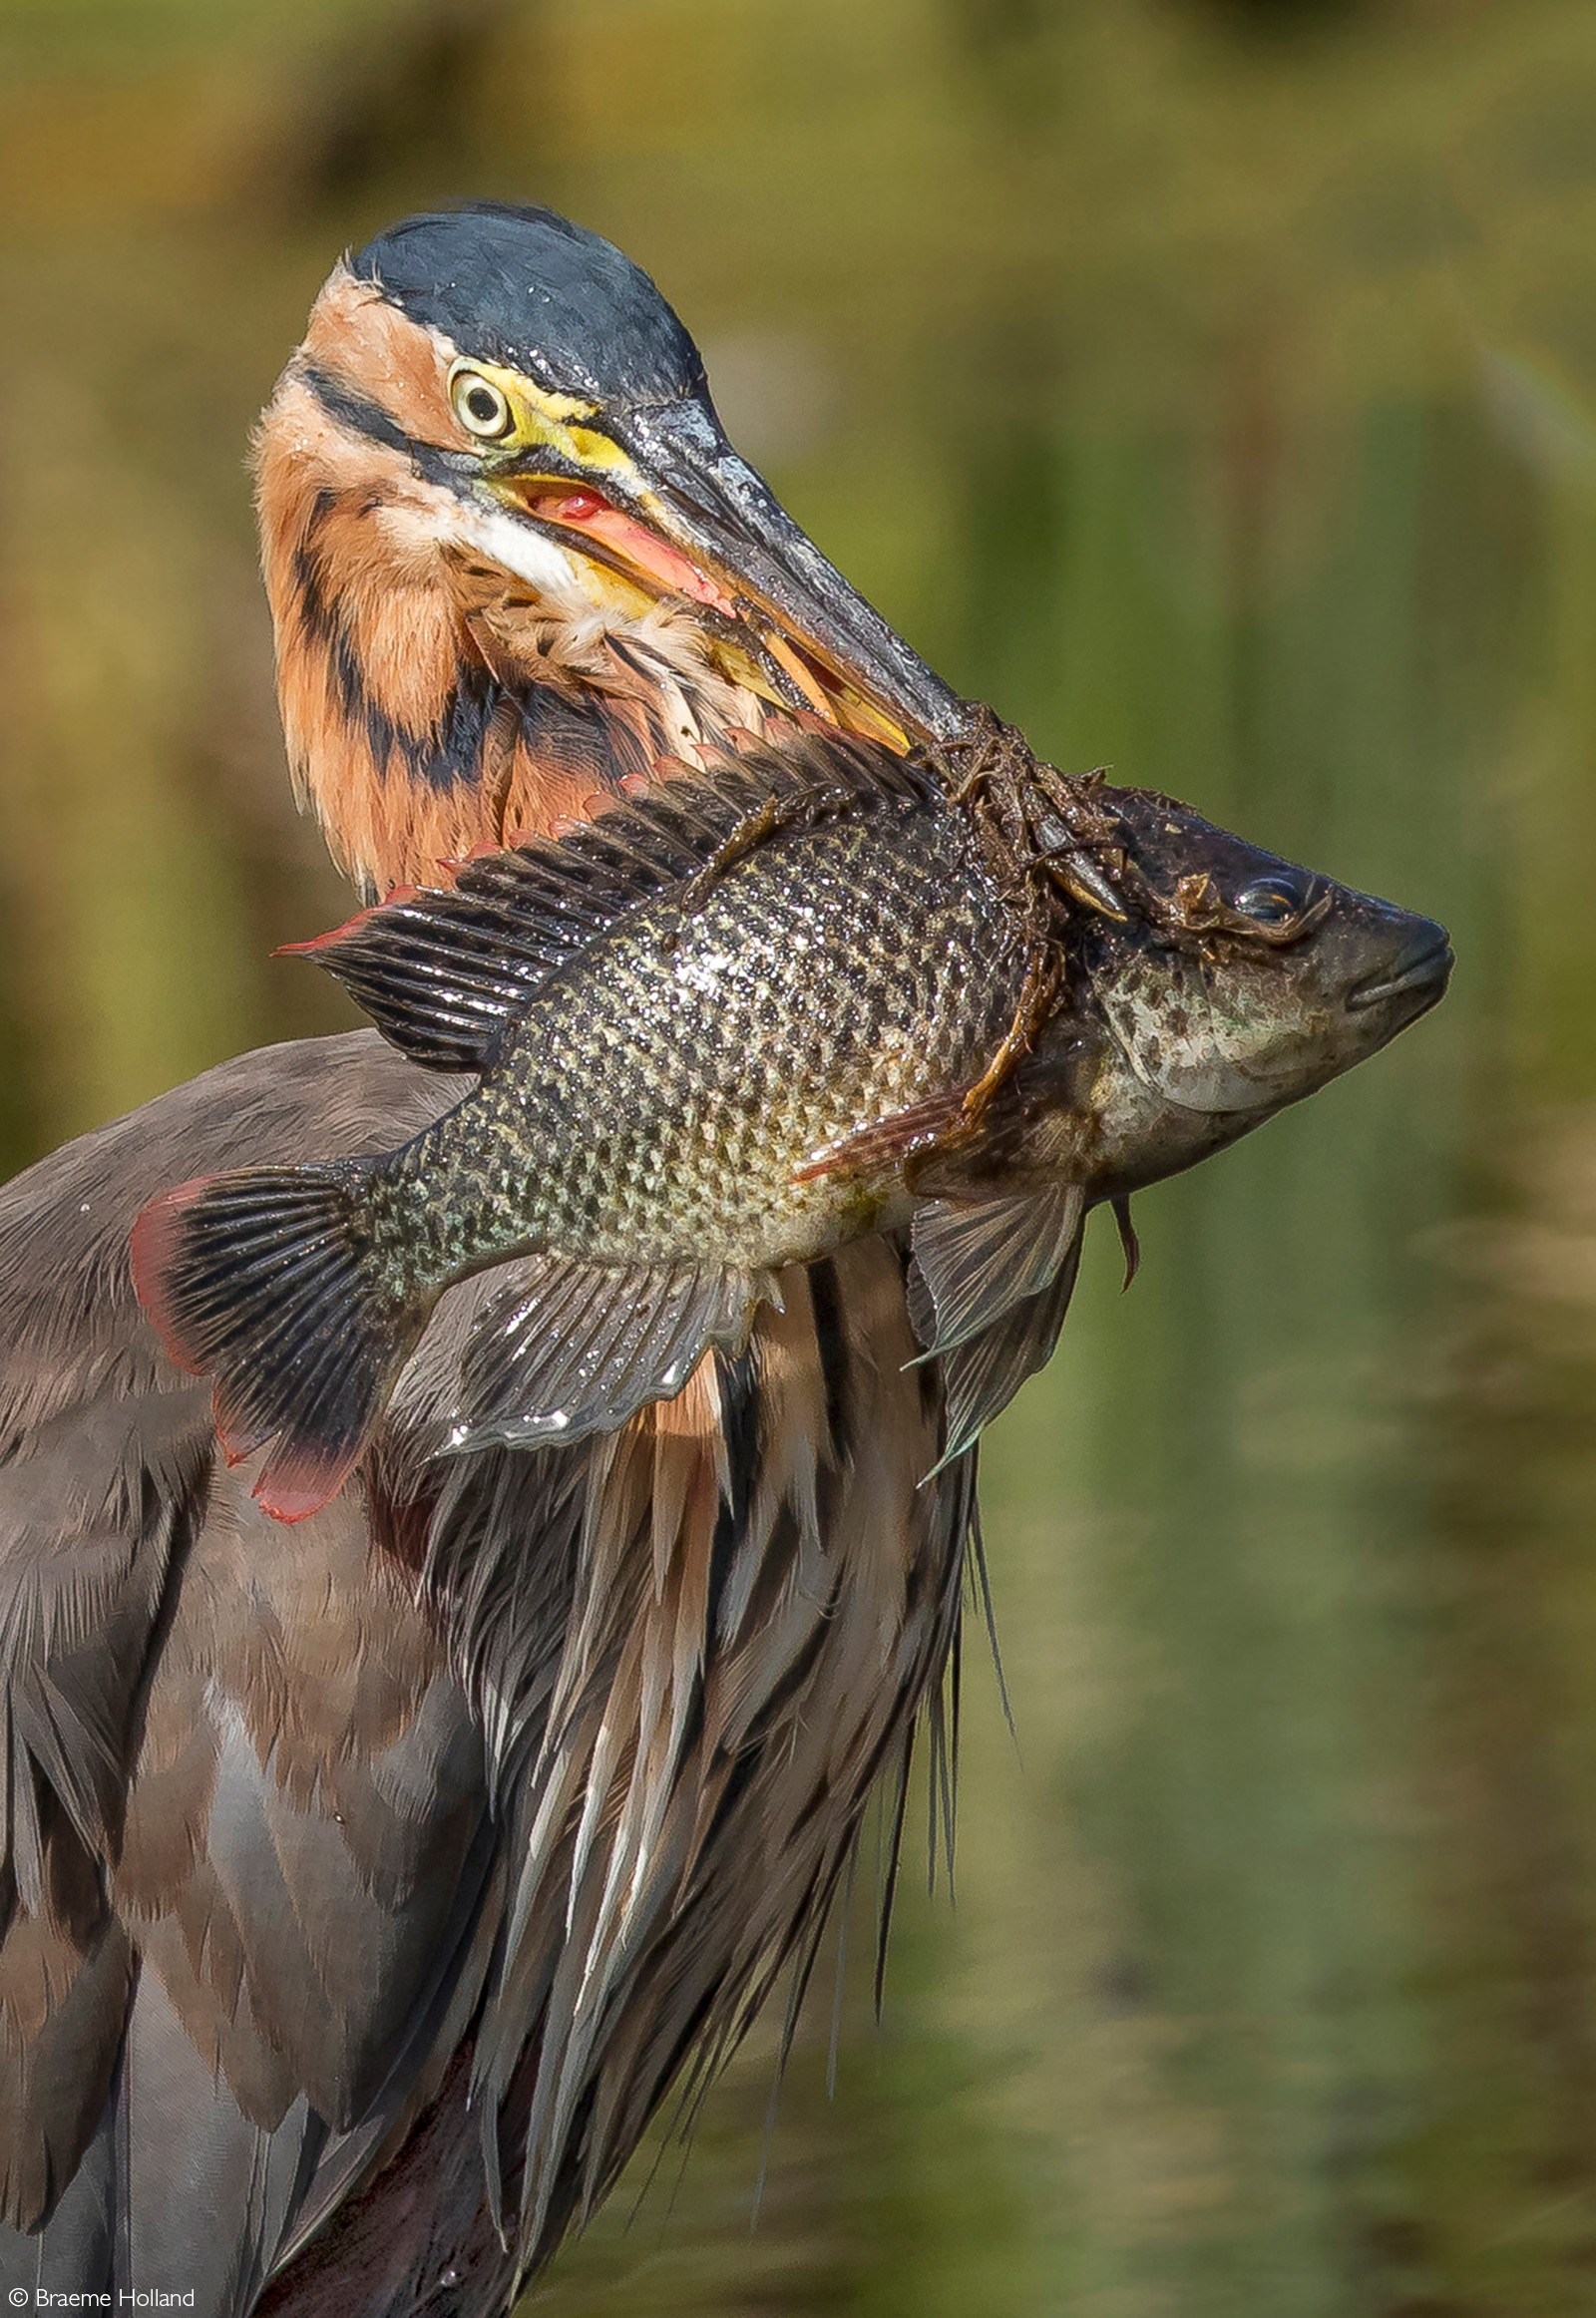 A purple heron proudly displays a Mozambique tilapia before swallowing the sizeable fish. Intaka Island Wetlands, Cape Town, South Africa © Braeme Holland